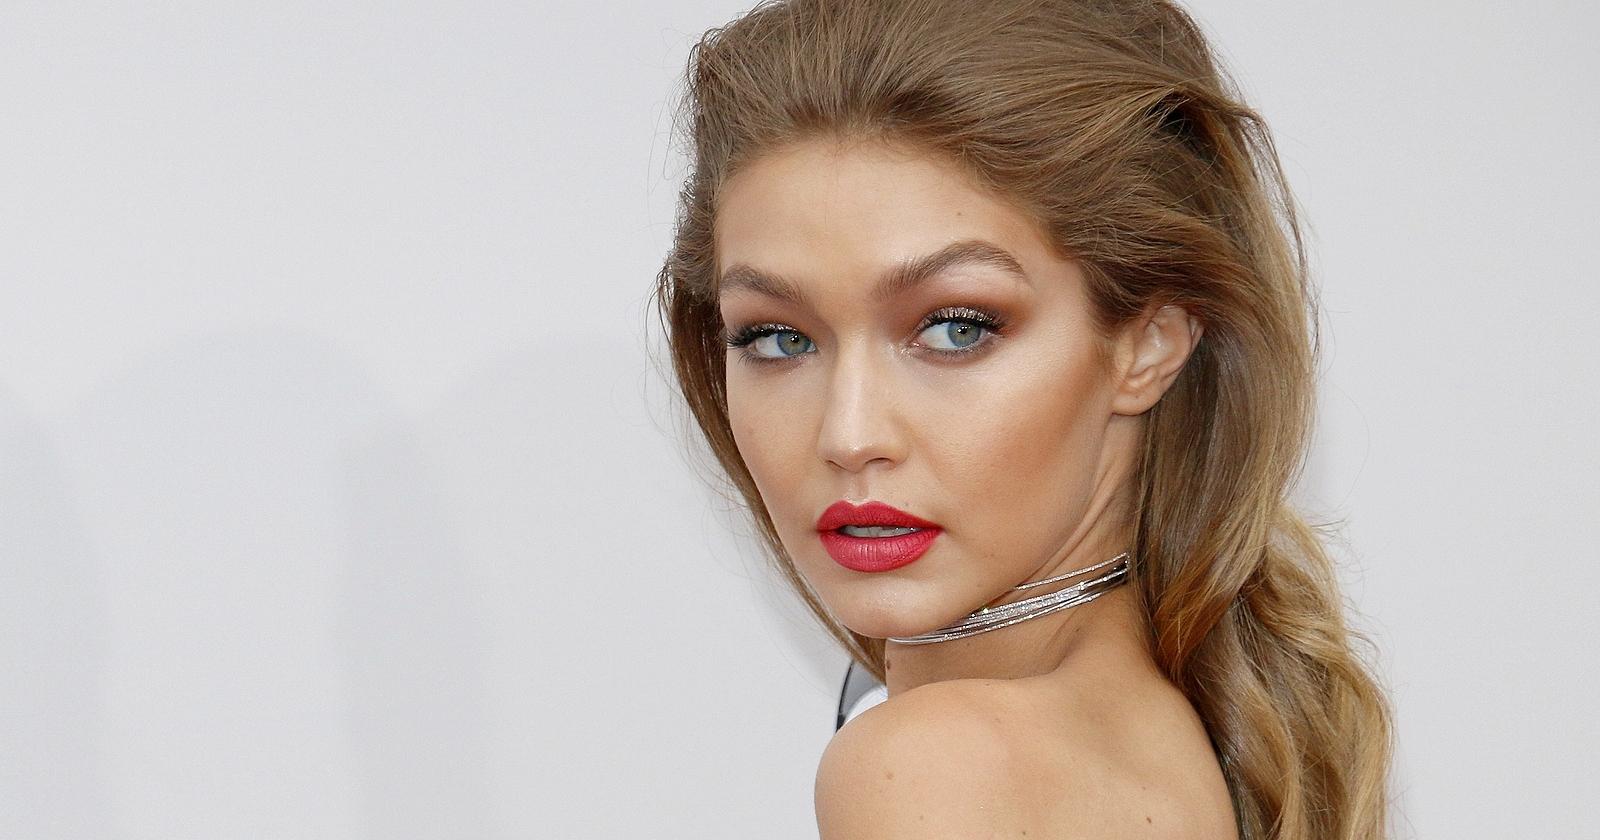 What Was Gigi Hadid's First Runway